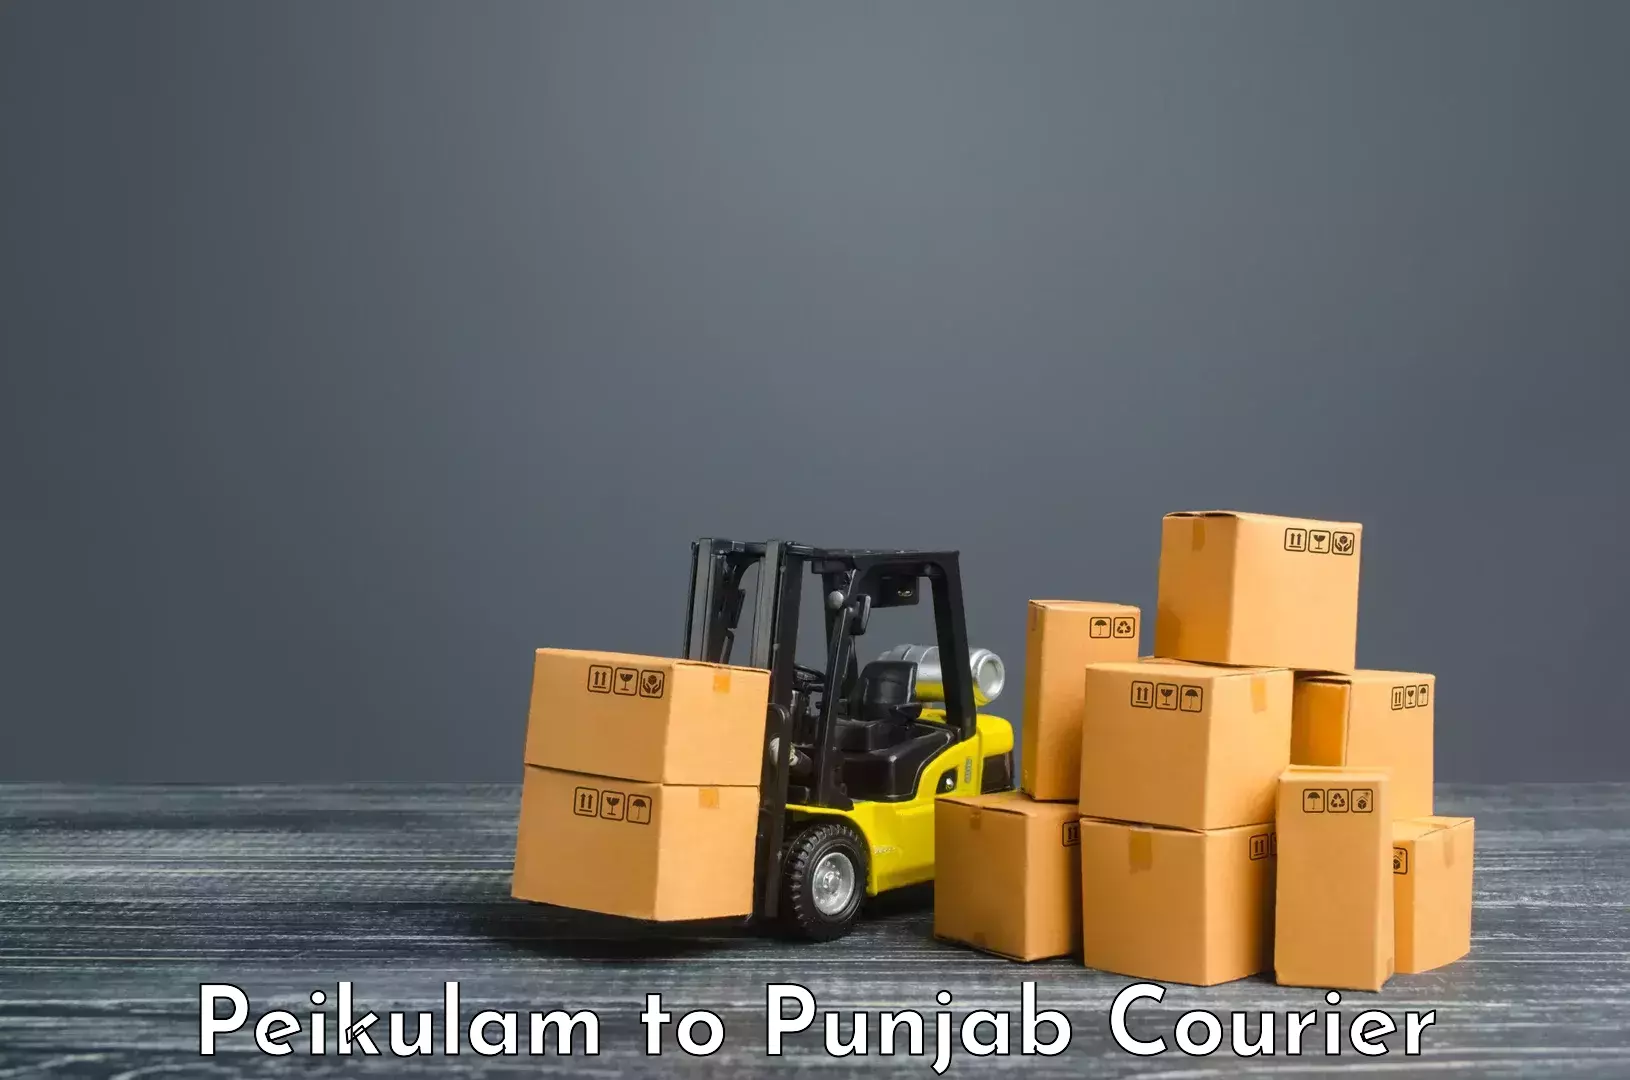 Easy access courier services in Peikulam to Talwara